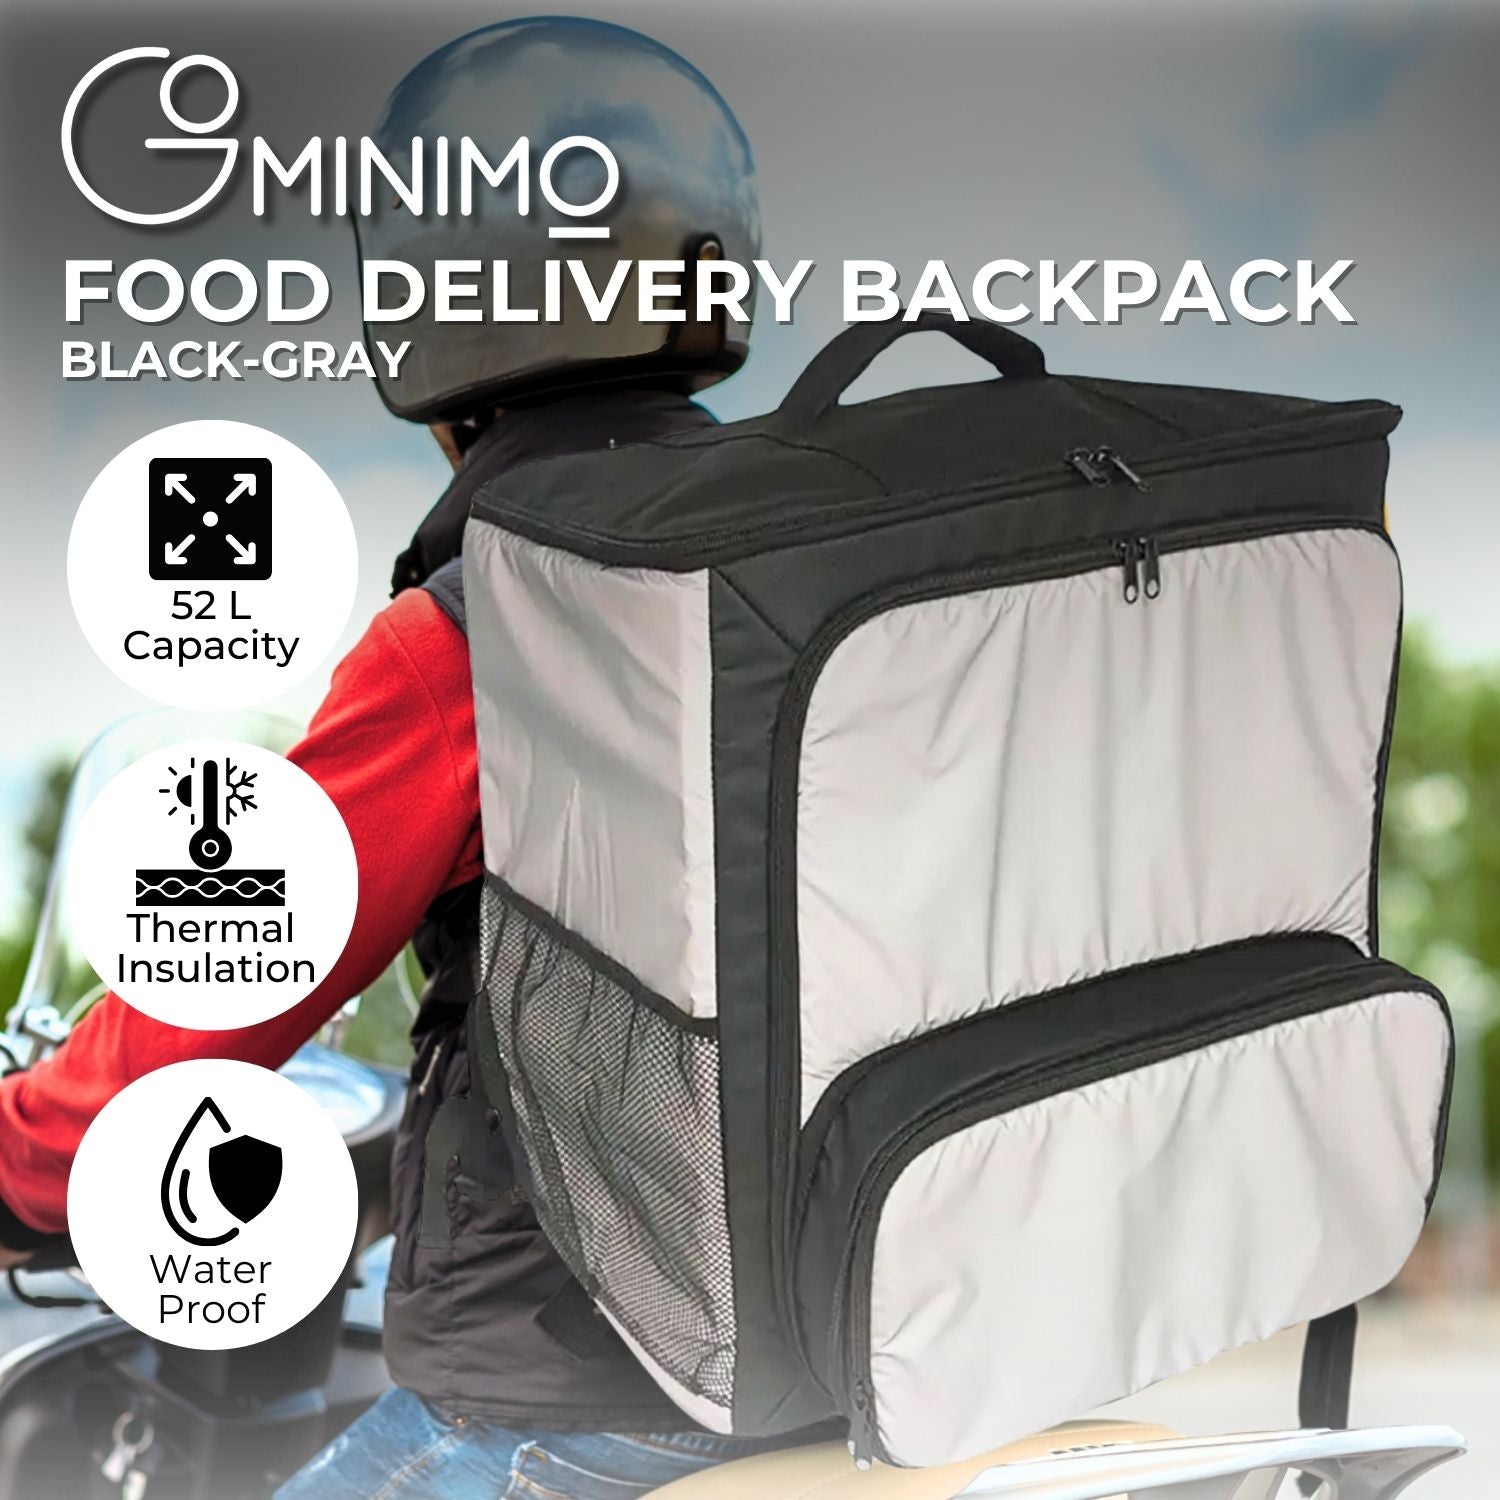 GOMINIMO 52L Insulated Food Delivery Backpack with Reflective Panels for Uber Eats (Black)